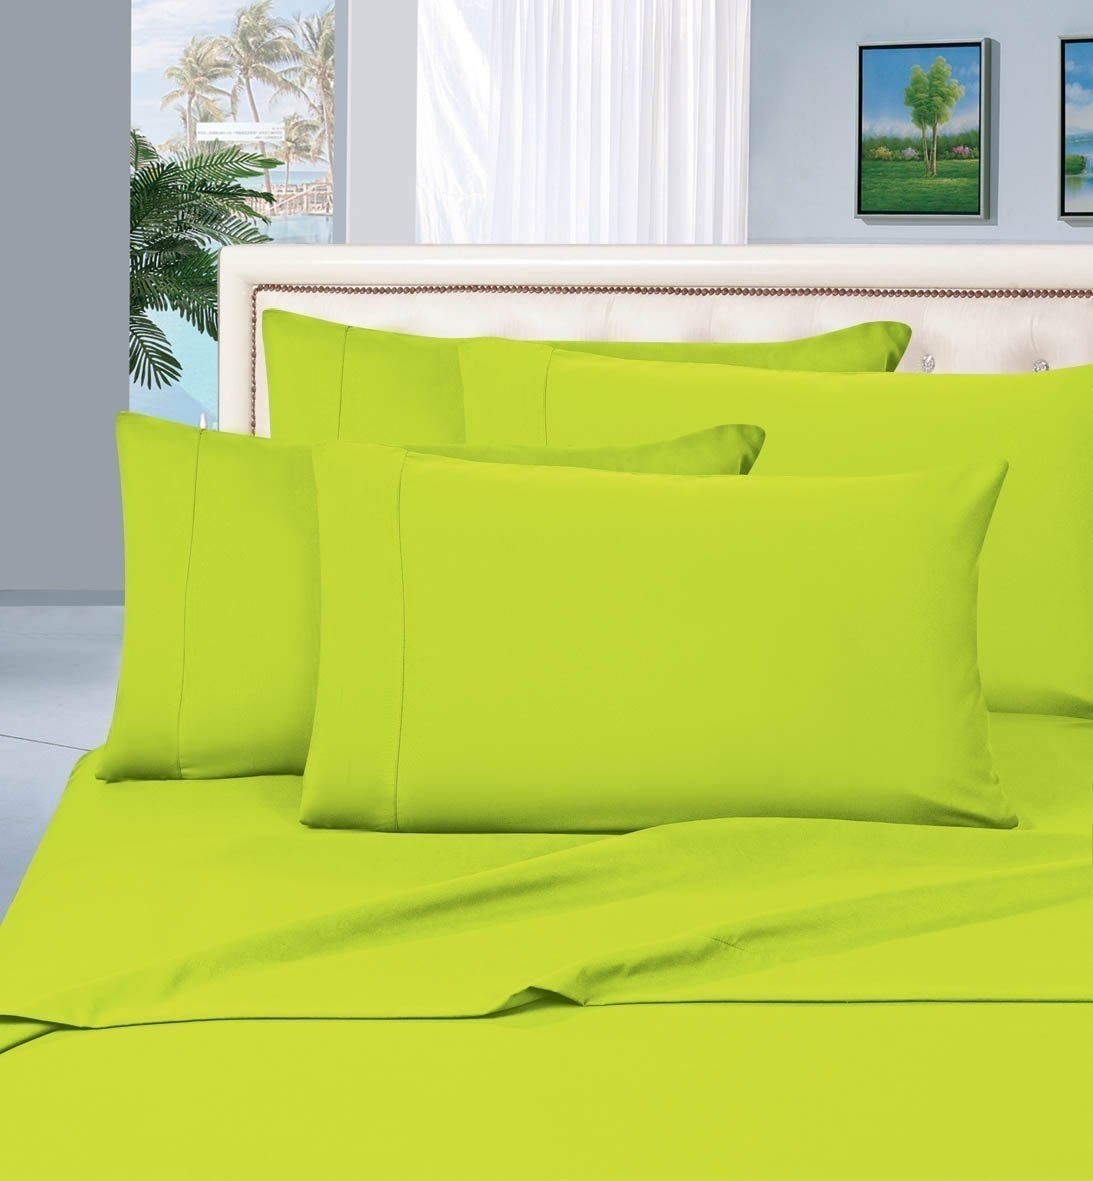 Elegant Comfort 1500 Series Wrinkle Resistant Egyptian Quality Hypoallergenic Ultra Soft Luxury 4-piece Bed Sheet Set, King, Lime Green